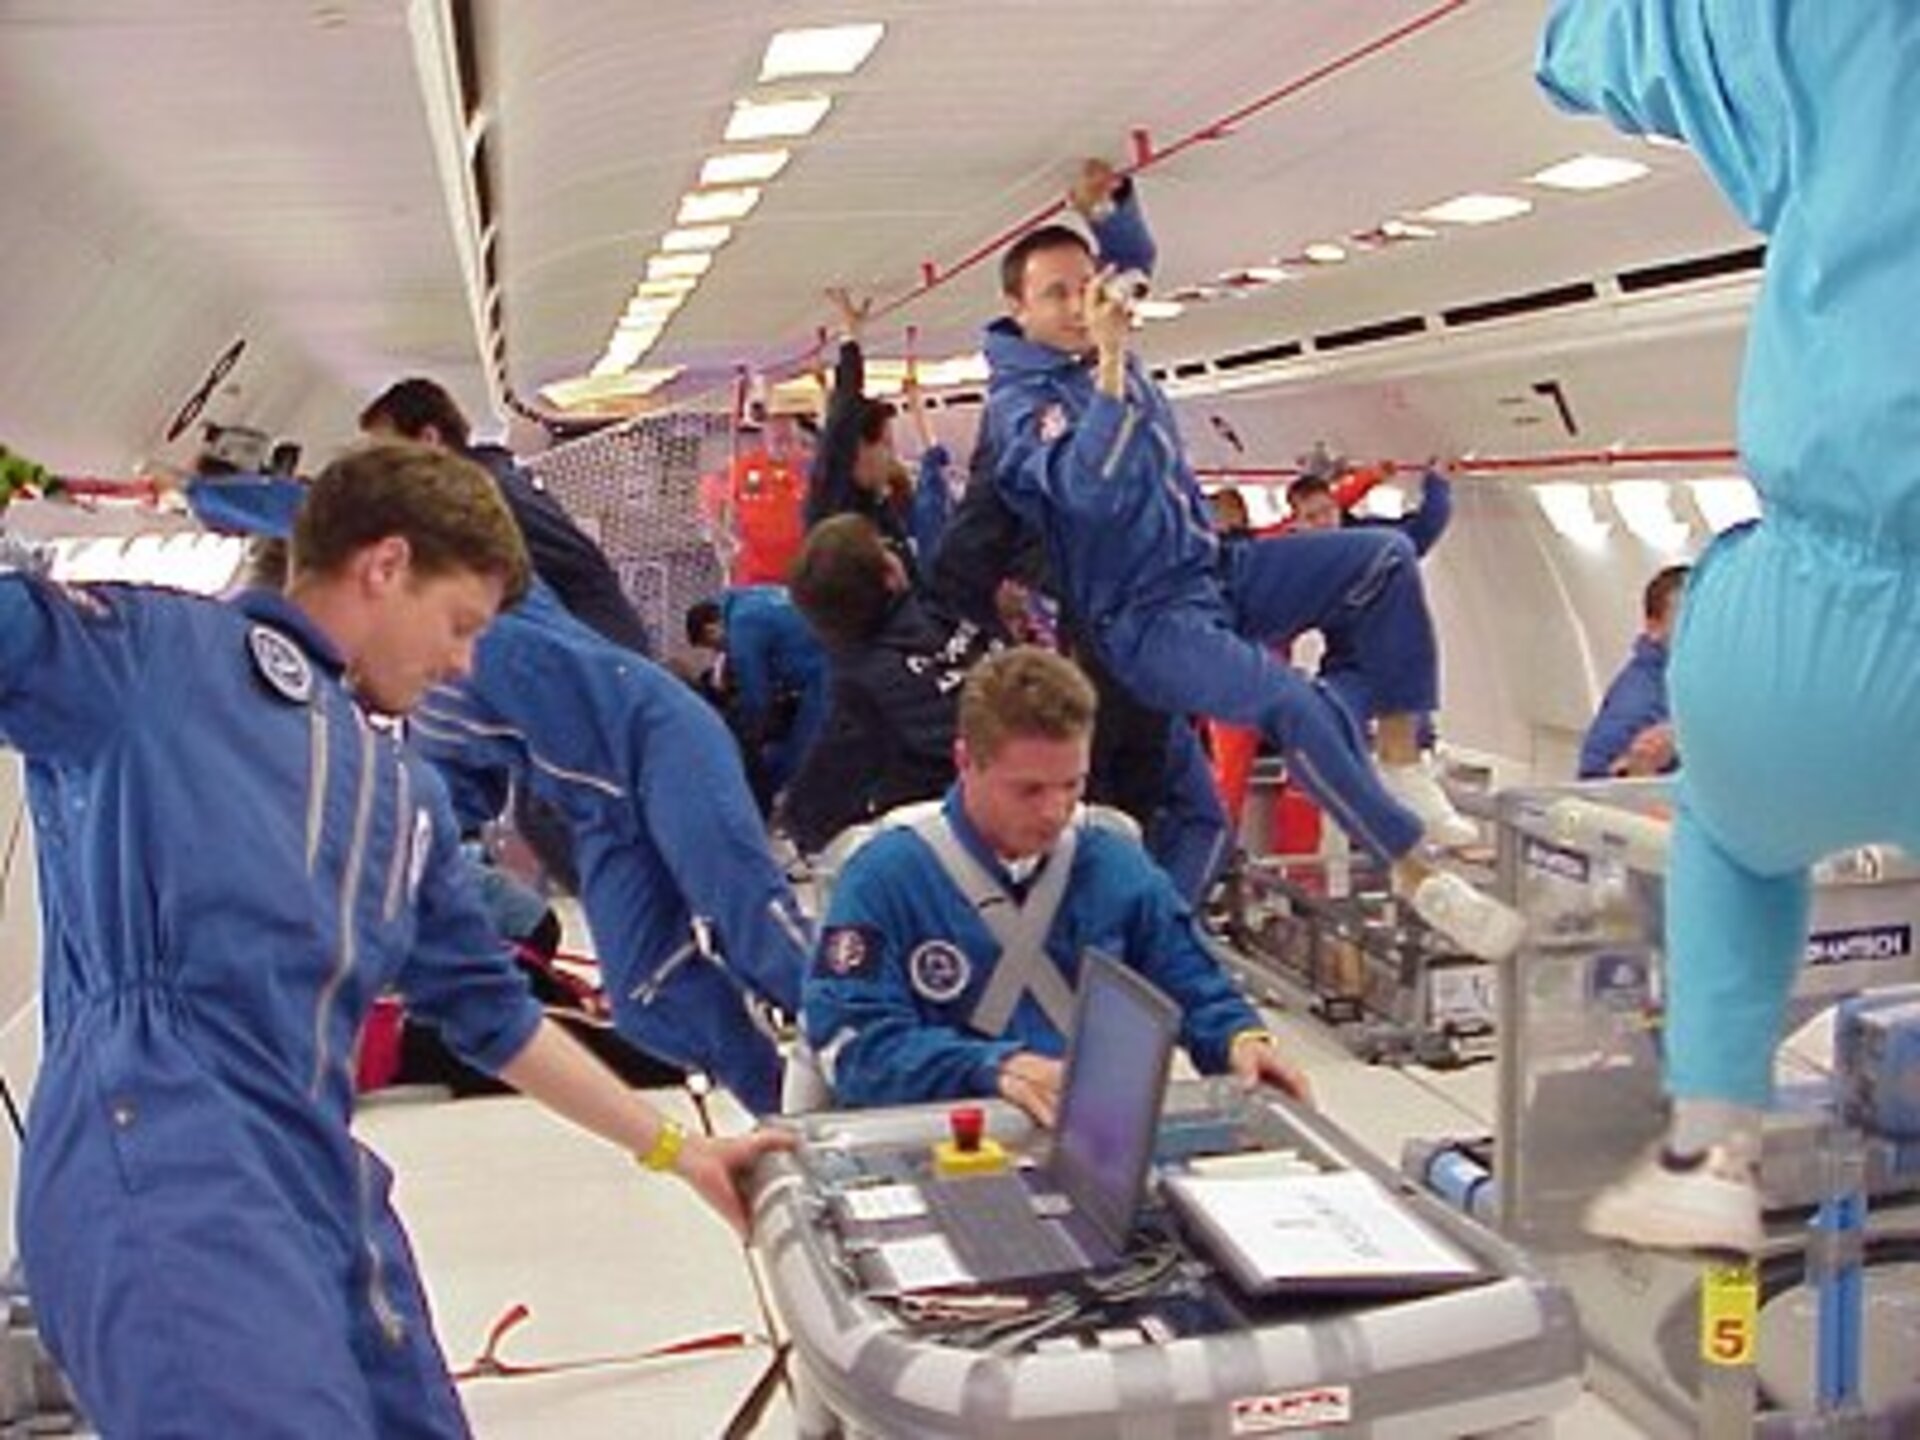 Experiments each have their own space in the cabine of the A300 'Zero-G' Airbus